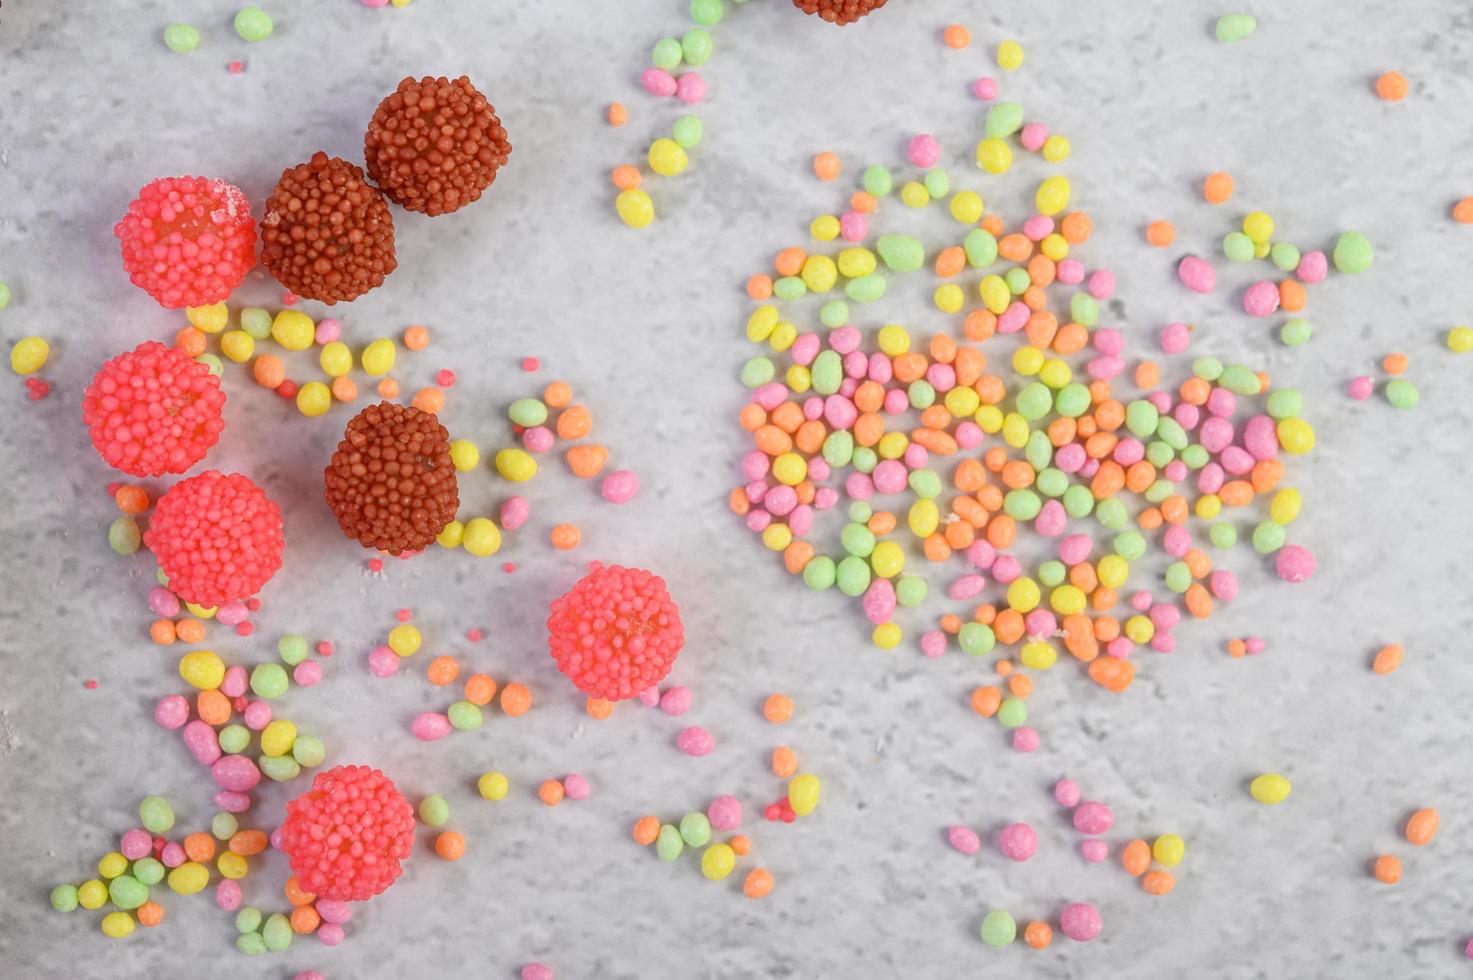 Colorful confectionary on gray background photo